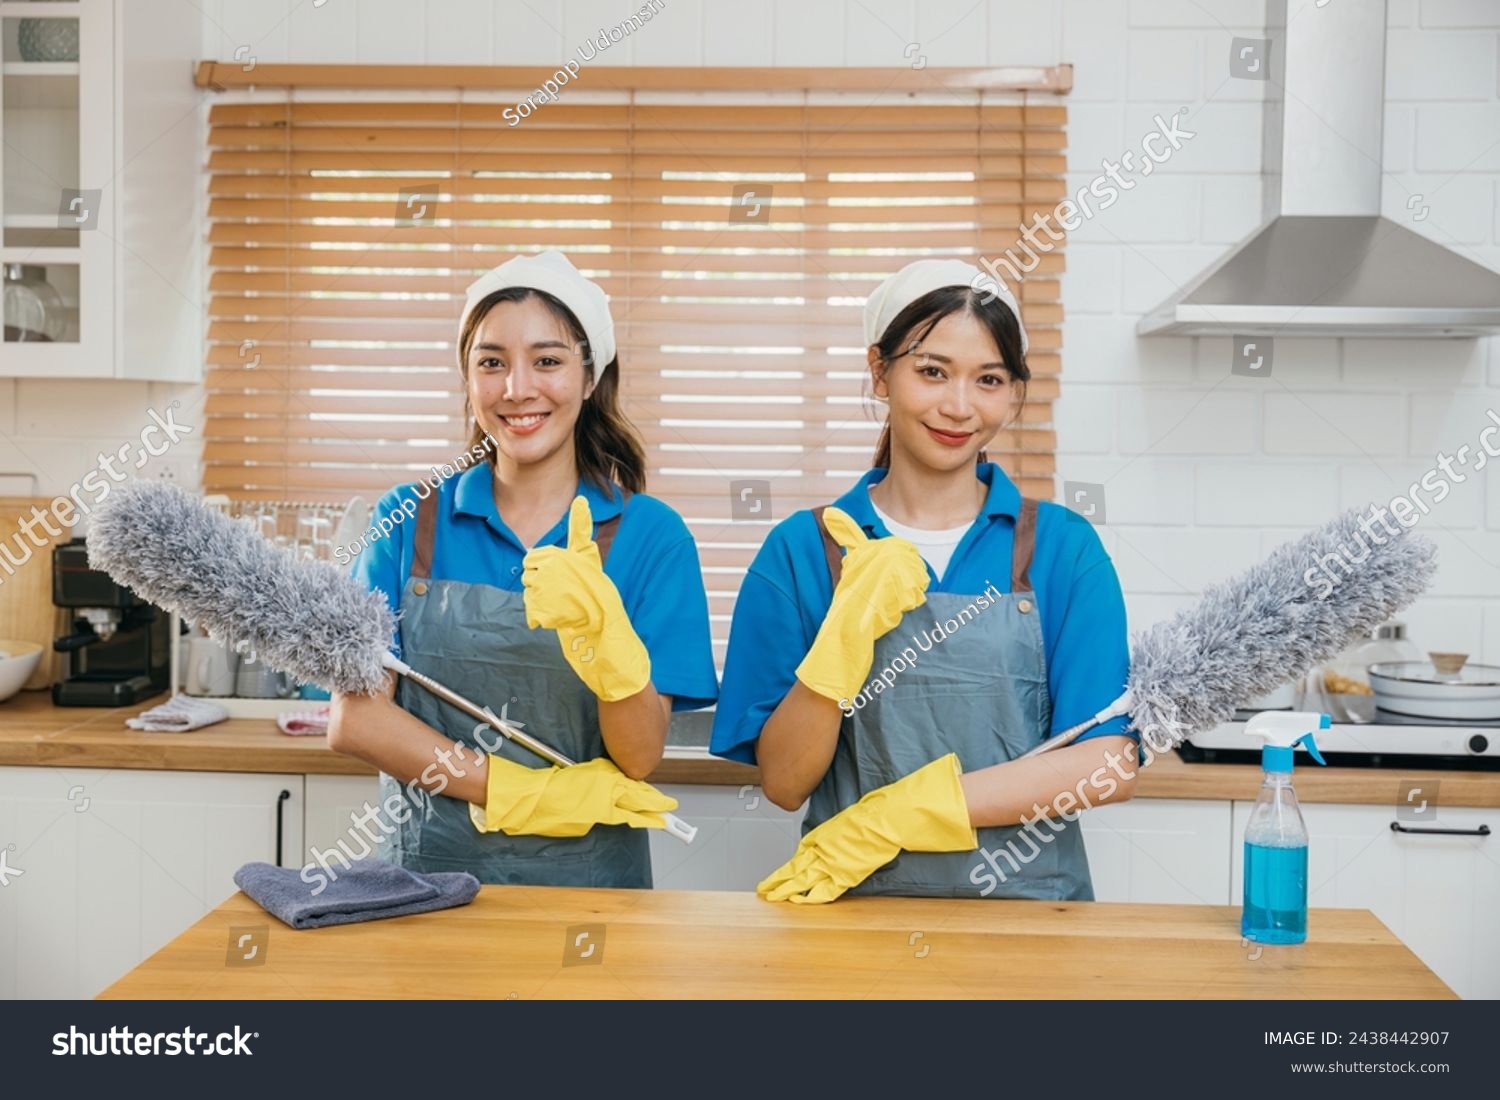 Cleaning service women in uniform stand on kitchen counter holding duster foggy spray and rag. Emphasizing teamwork in efficient housework. Clean portrait two uniform maid working smiling employee. #2438442907